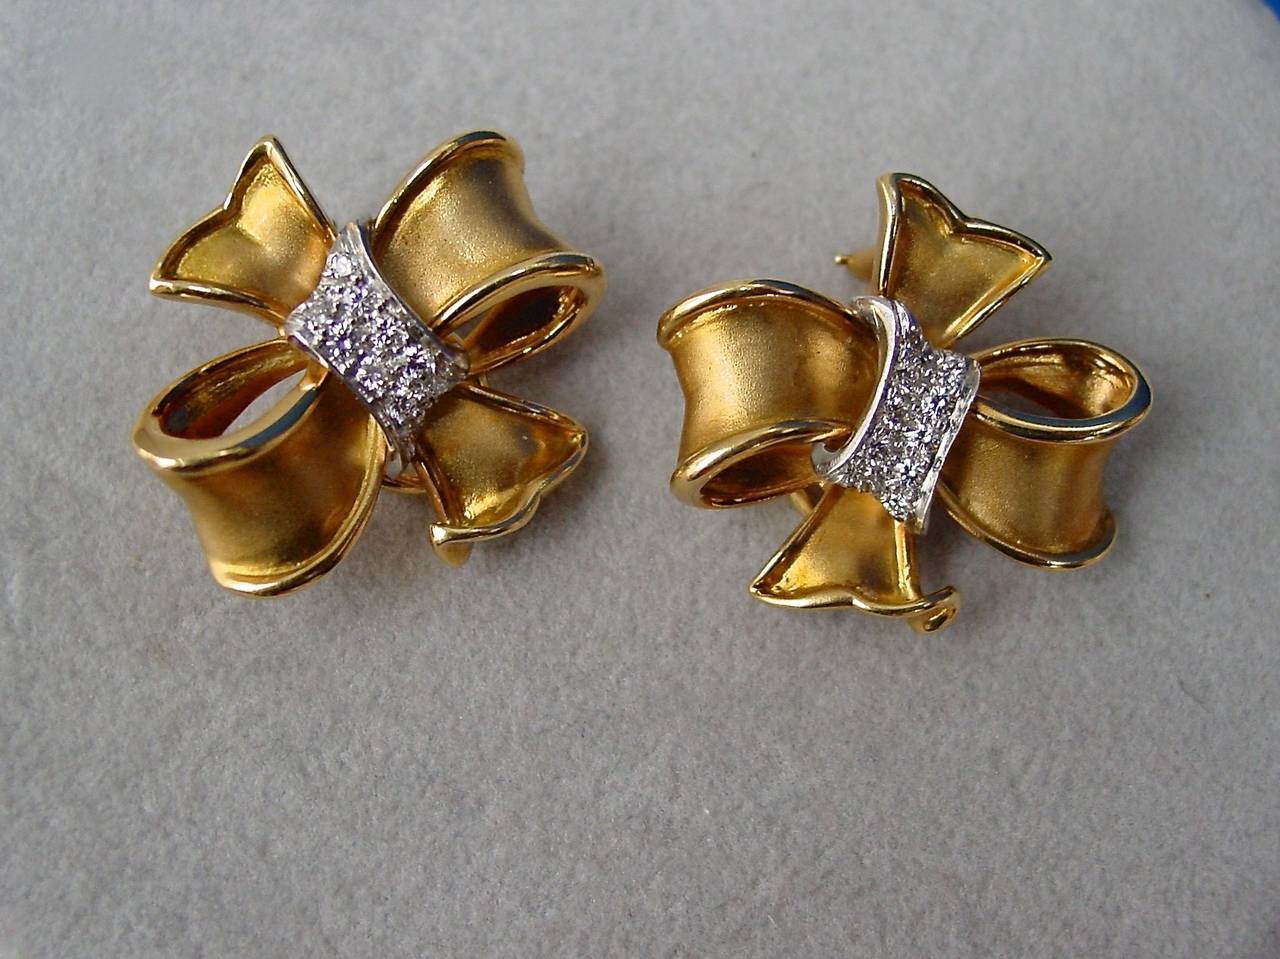 A pair of finely made satin finished 18 karat yellow gold, platinum and diamond bow ear clips. Set with twenty round brilliant diamonds weighing approximately .60 carats. Stamped SB 18K Plat.